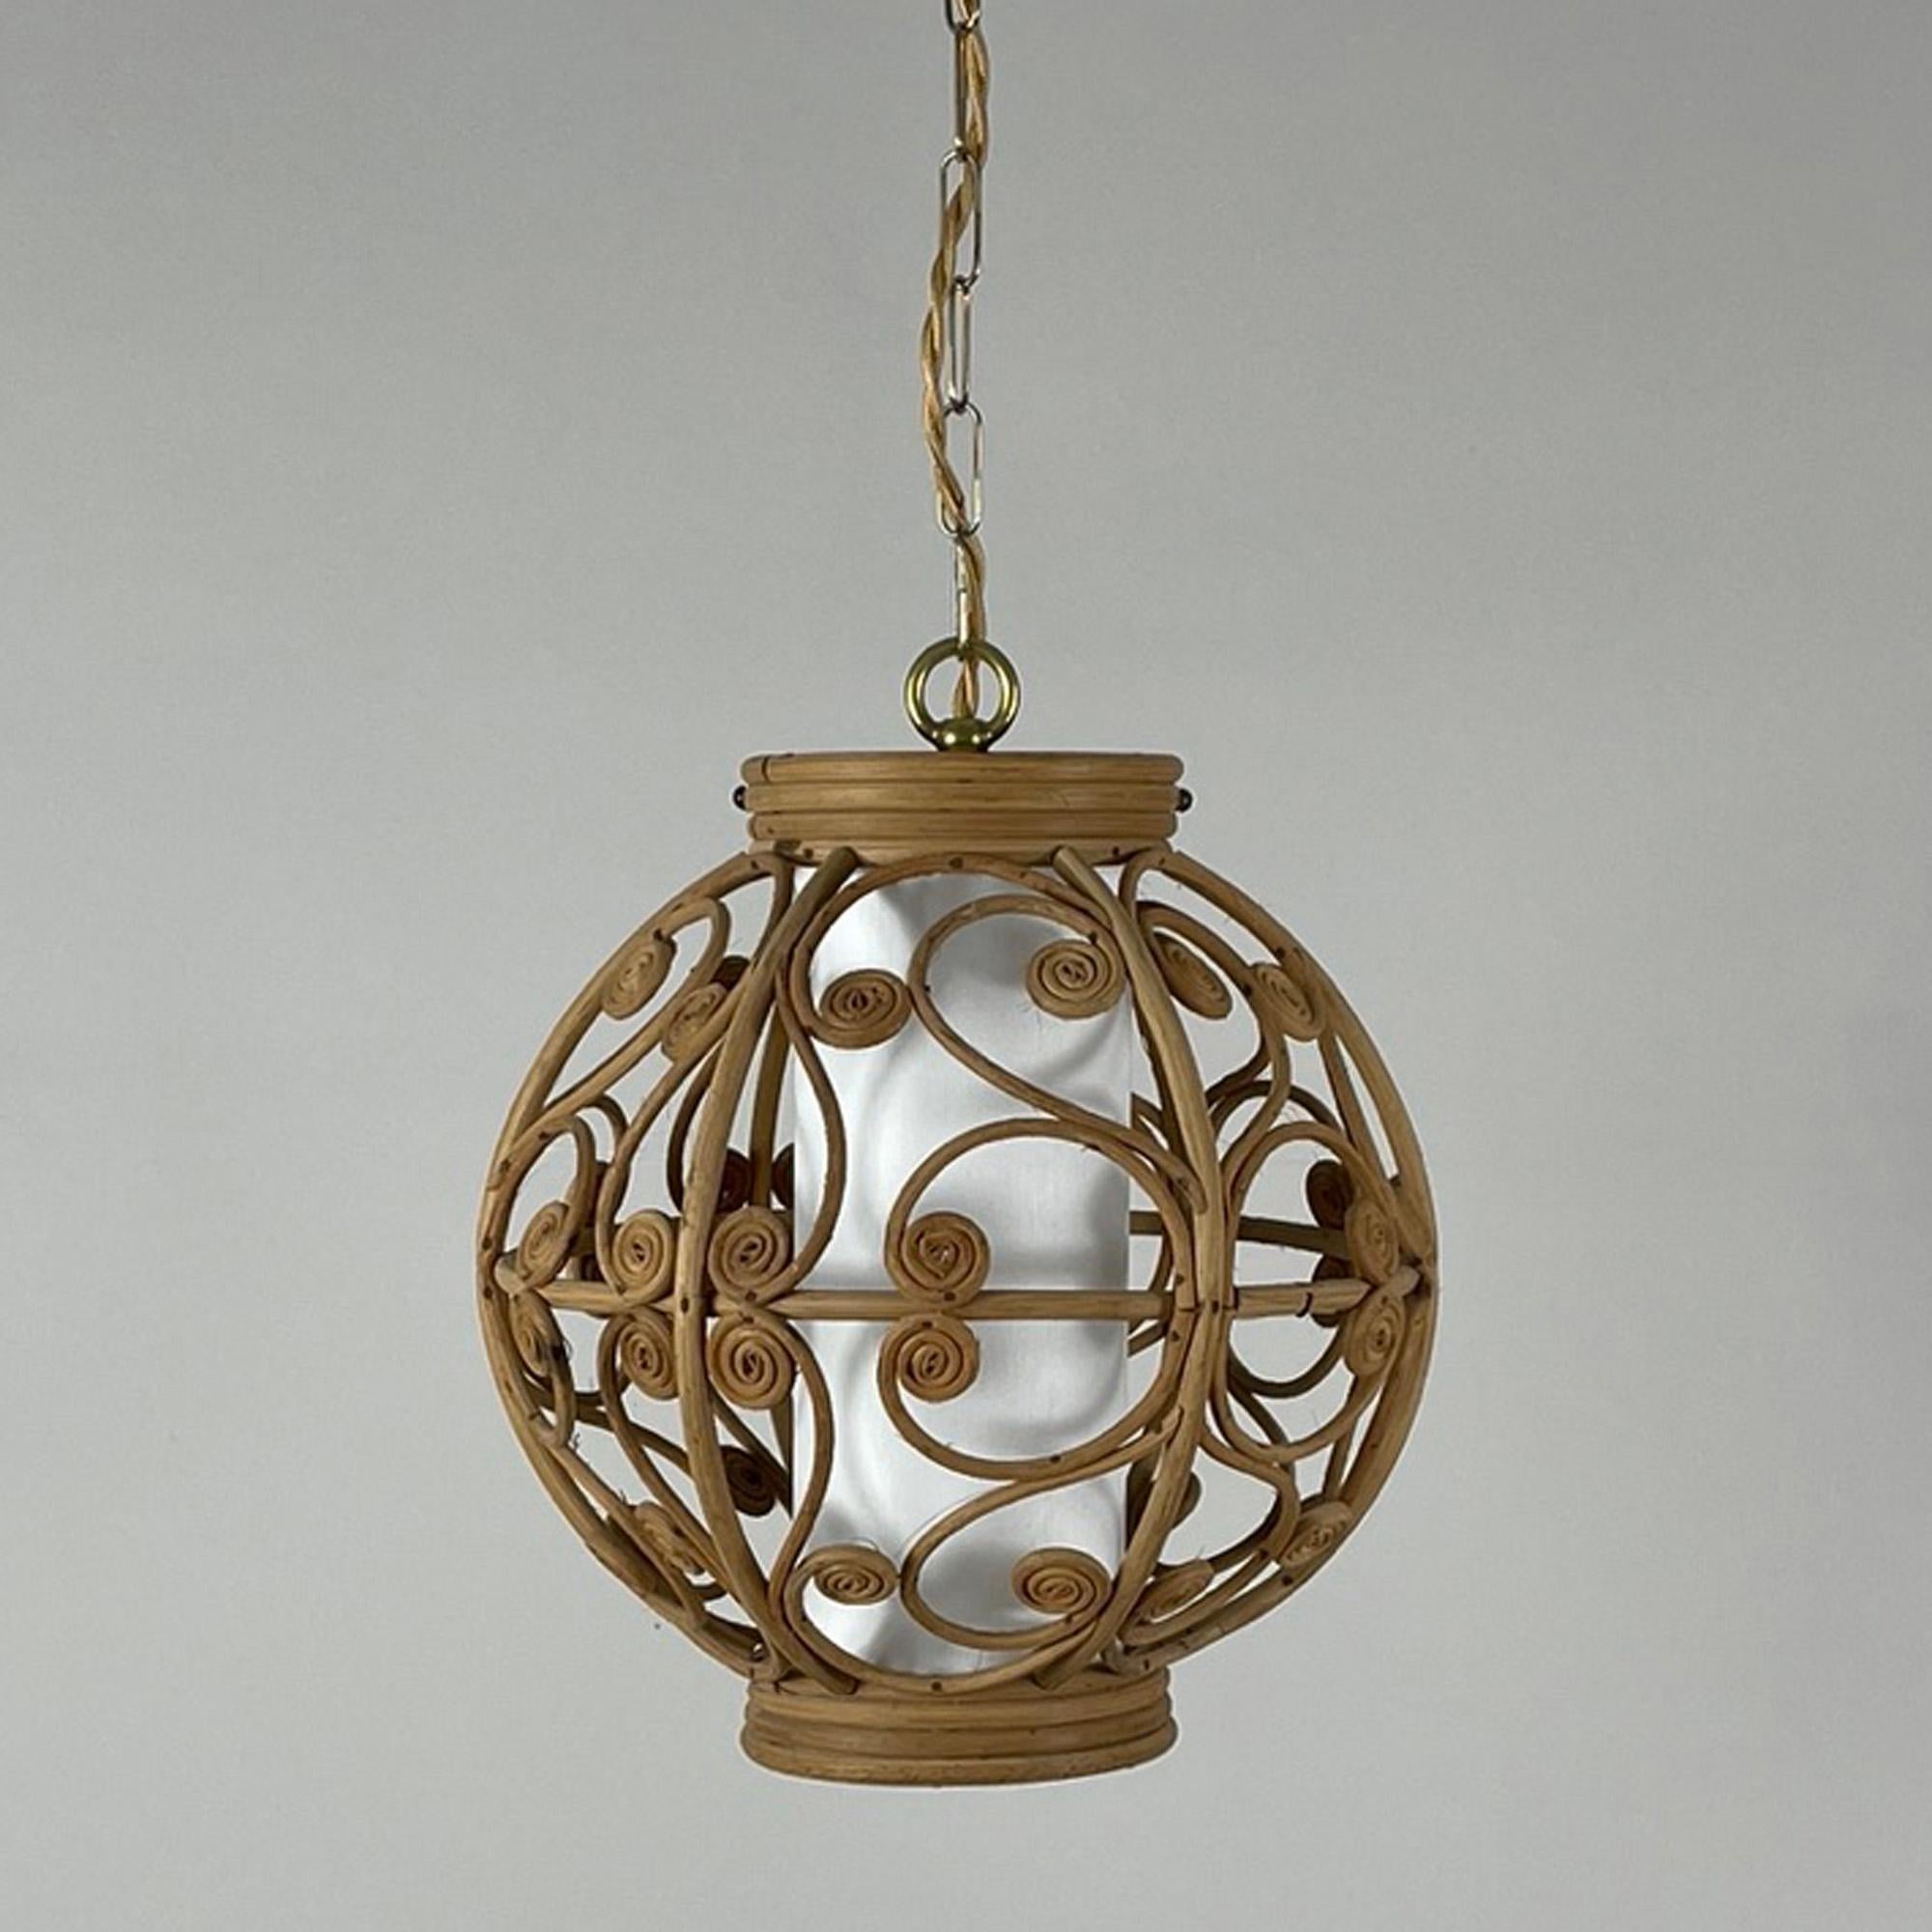 This beautiful handcrafted pendant was designed and manufactured in Spain in the 1950s to 1960s. It features a rattan lampshade with brass chain, silk cord and an off-white linen covered diffuser. Brass canopy.

The light has been rewired with new